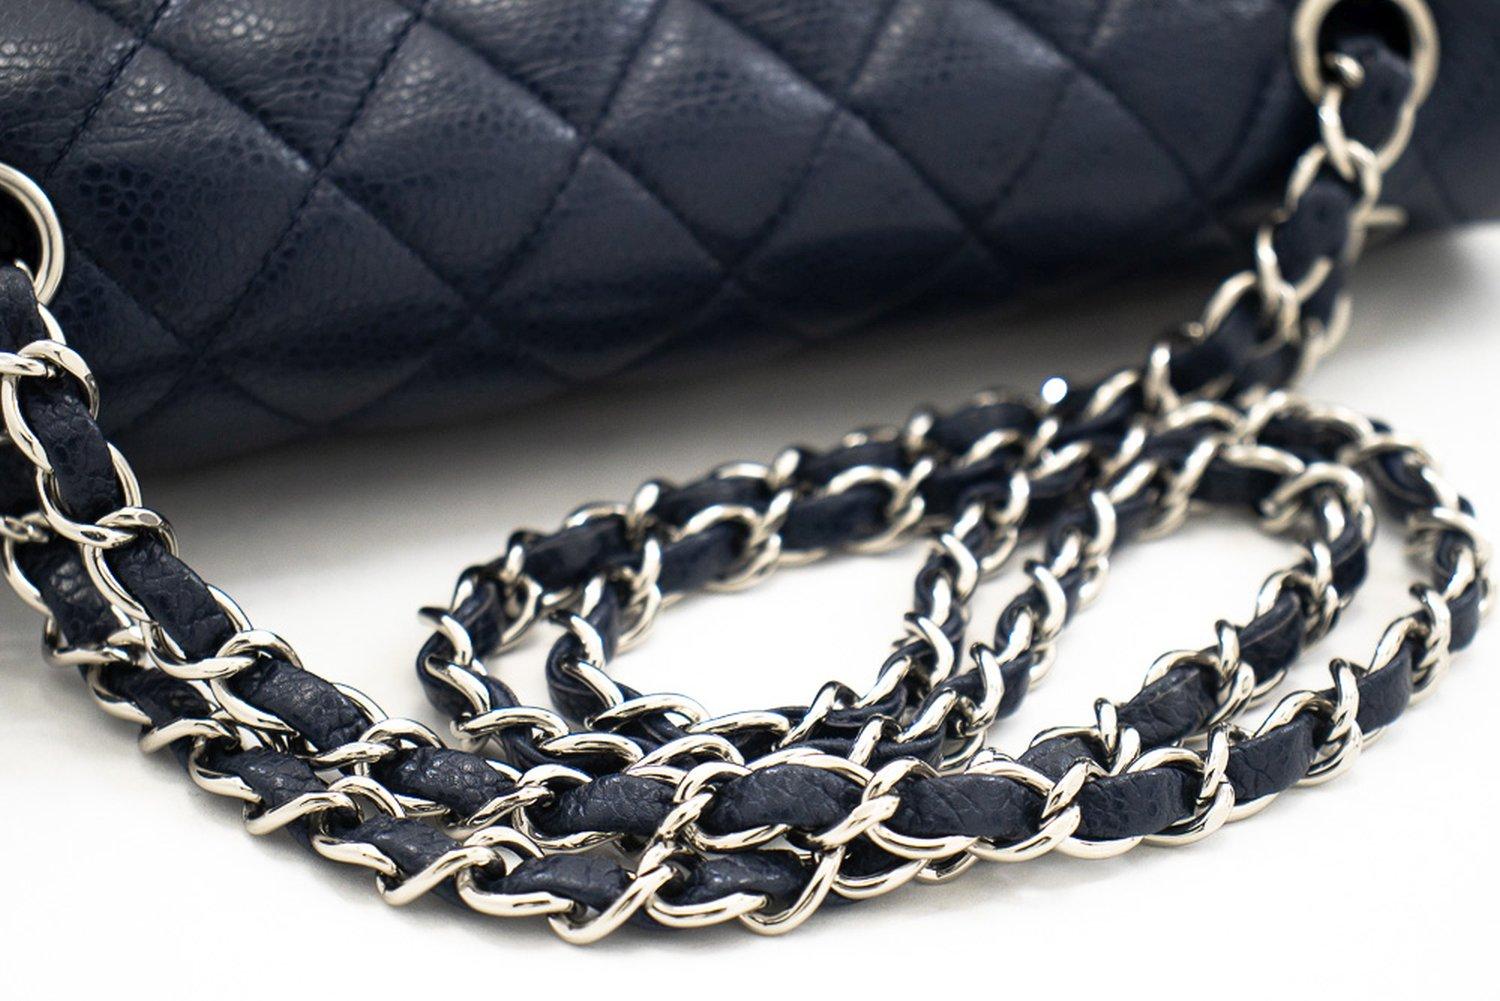 CHANEL Navy Caviar Double Chain Flap Shoulder Bag Quilted Leather 8